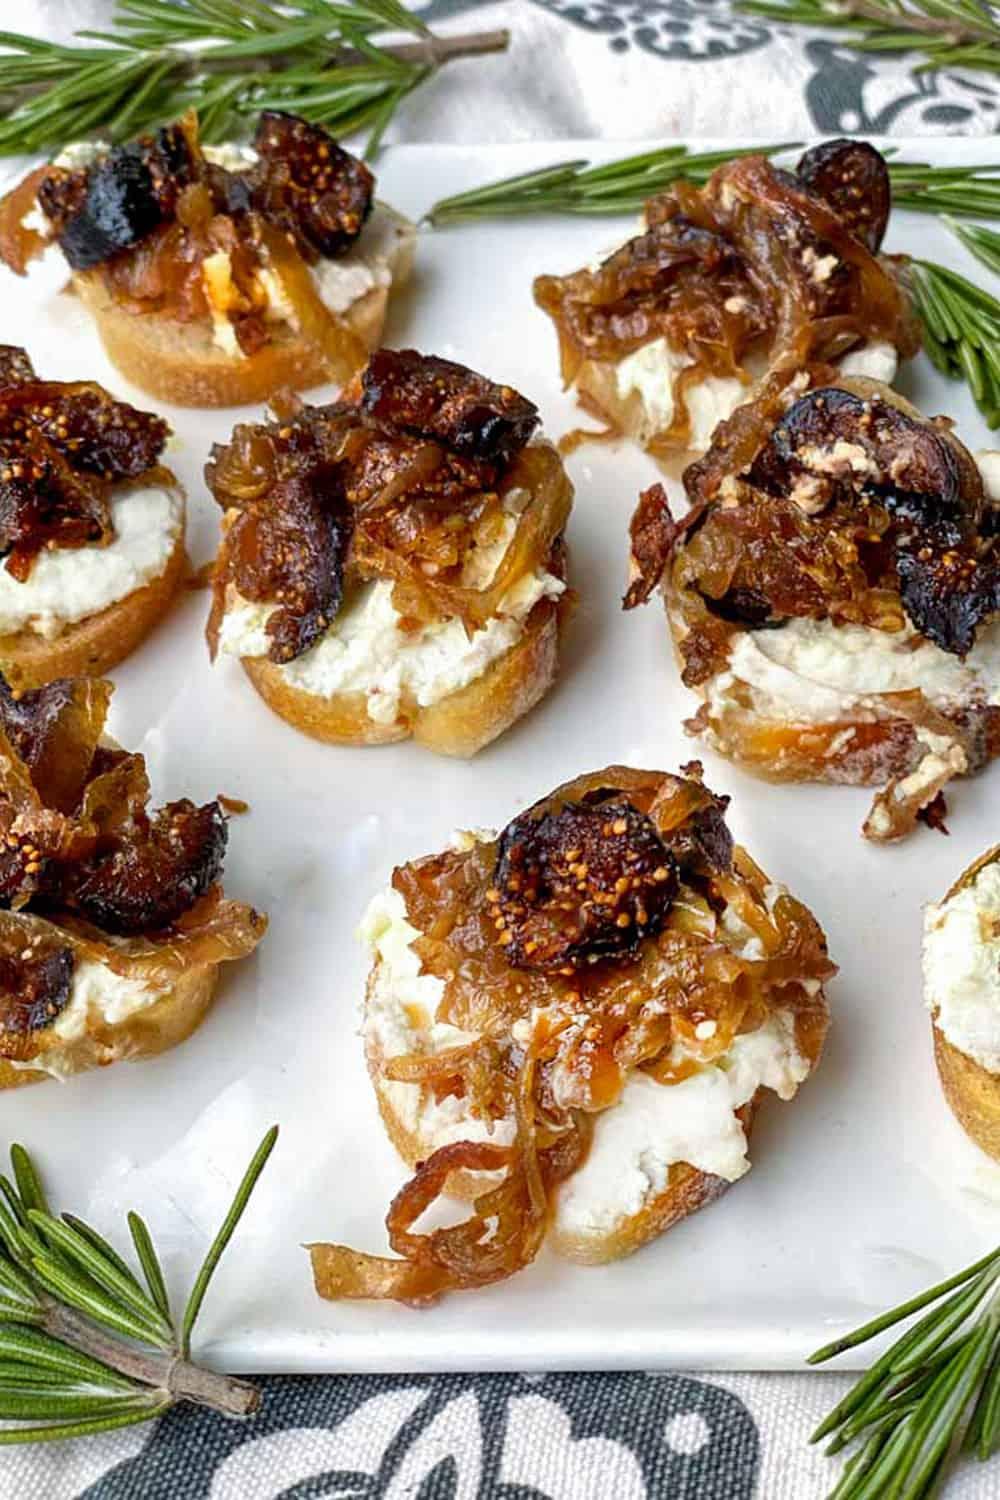 Caramelized Onion and Goat Cheese Pintxo